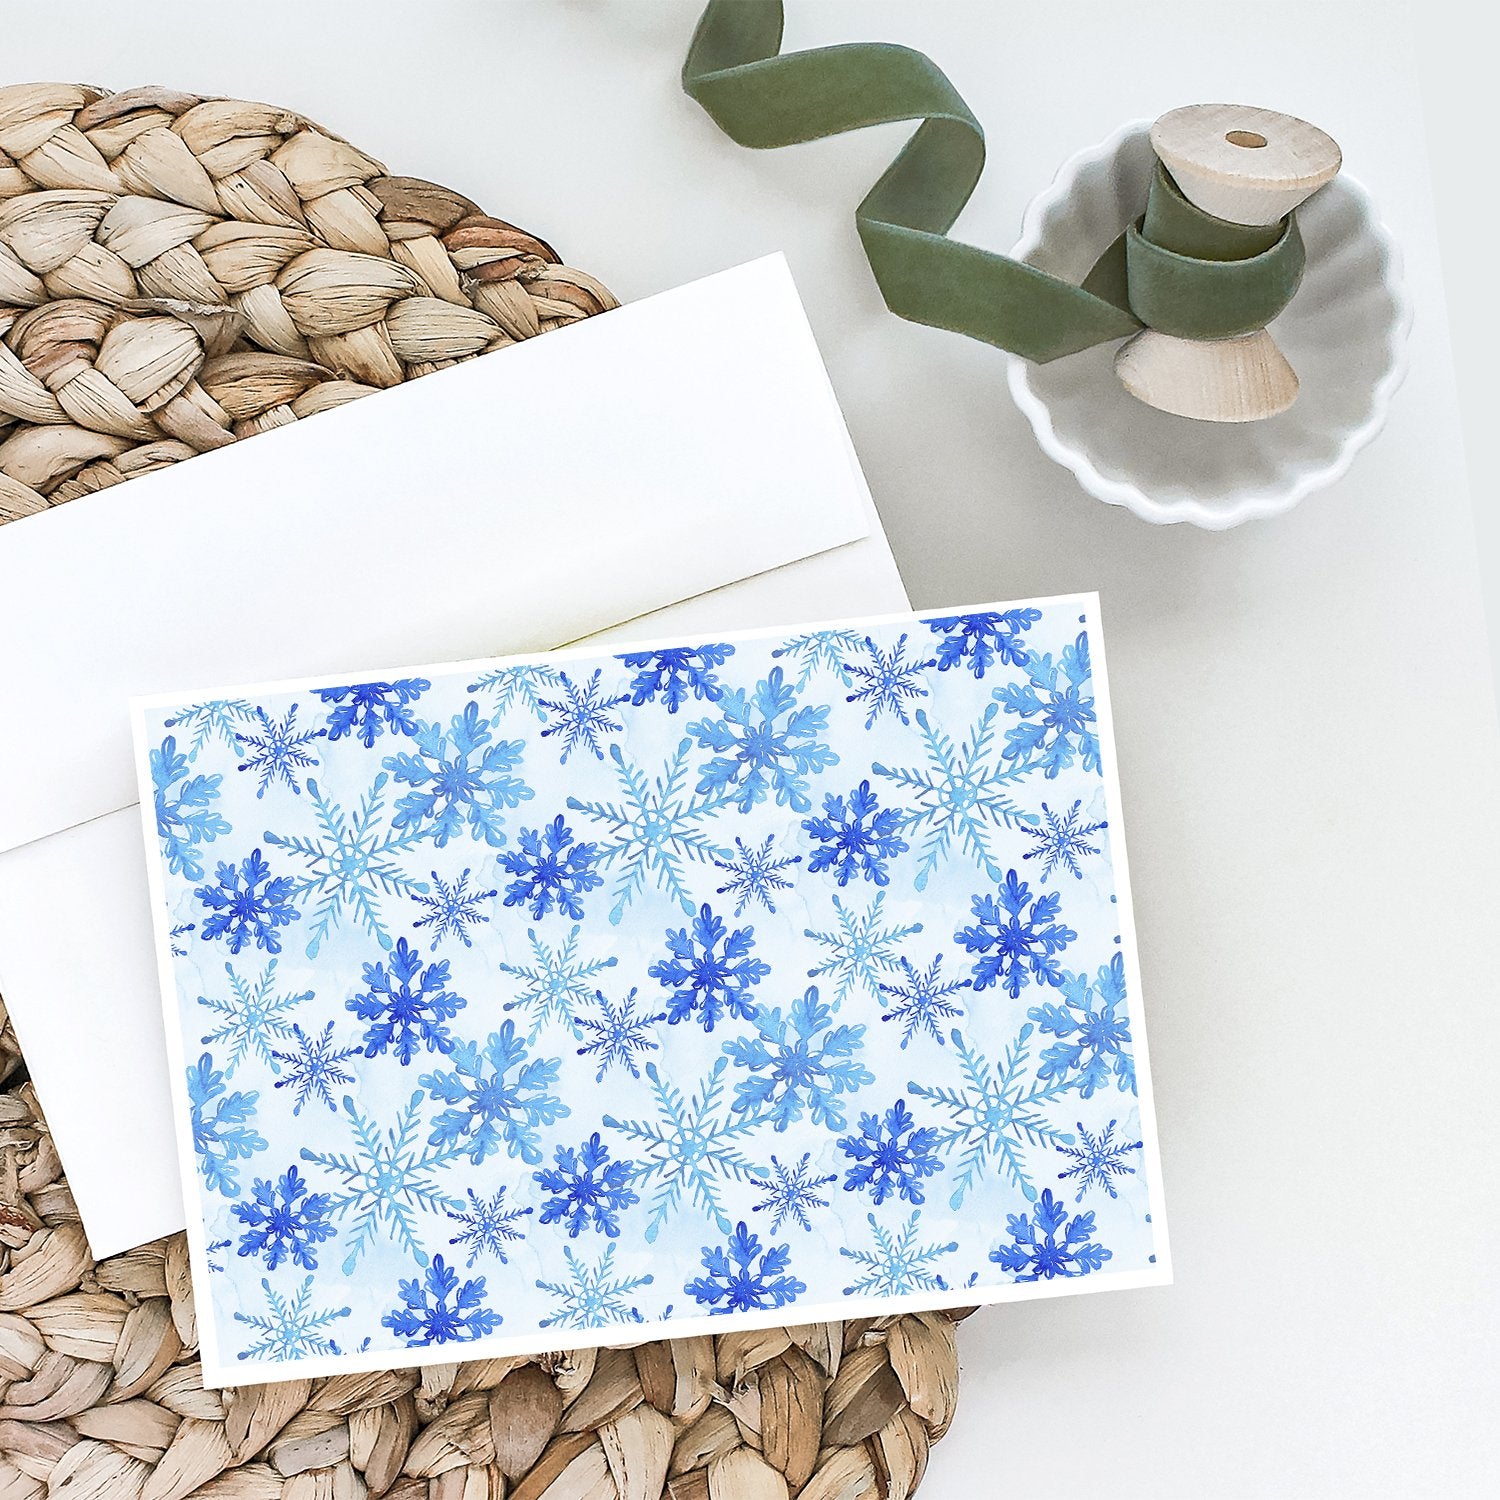 Buy this Blue Snowflakes Watercolor Greeting Cards and Envelopes Pack of 8